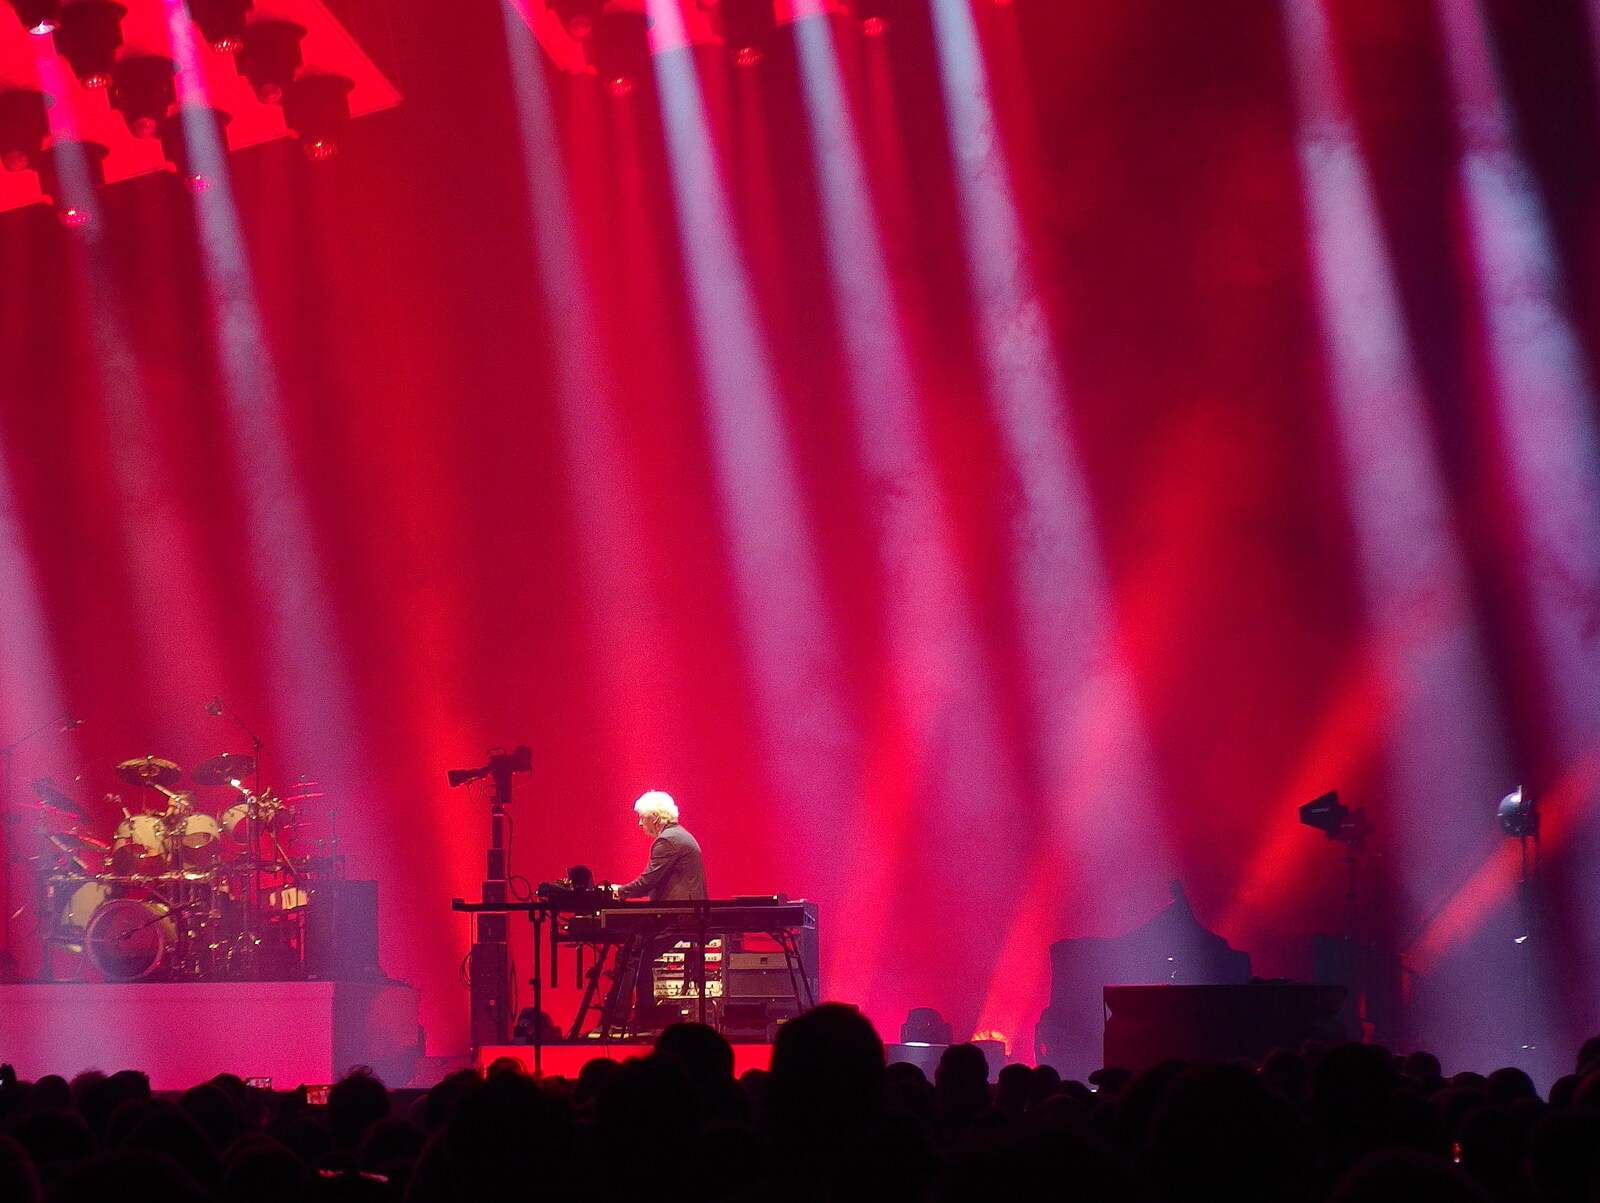 Tony Banks does his thing from Genesis at the O2, North Greenwich, London - 24th March 2022